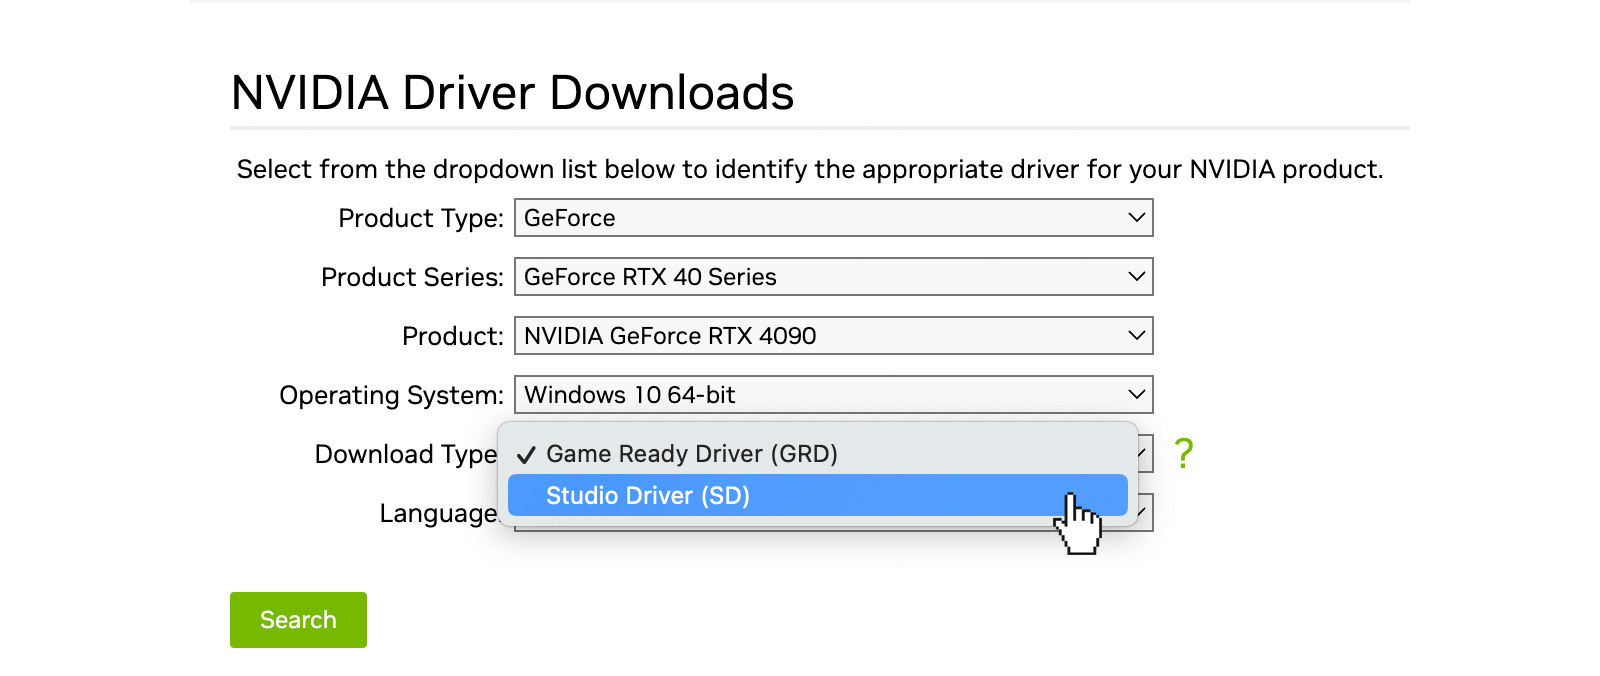 Download options for NVIDIA drivers